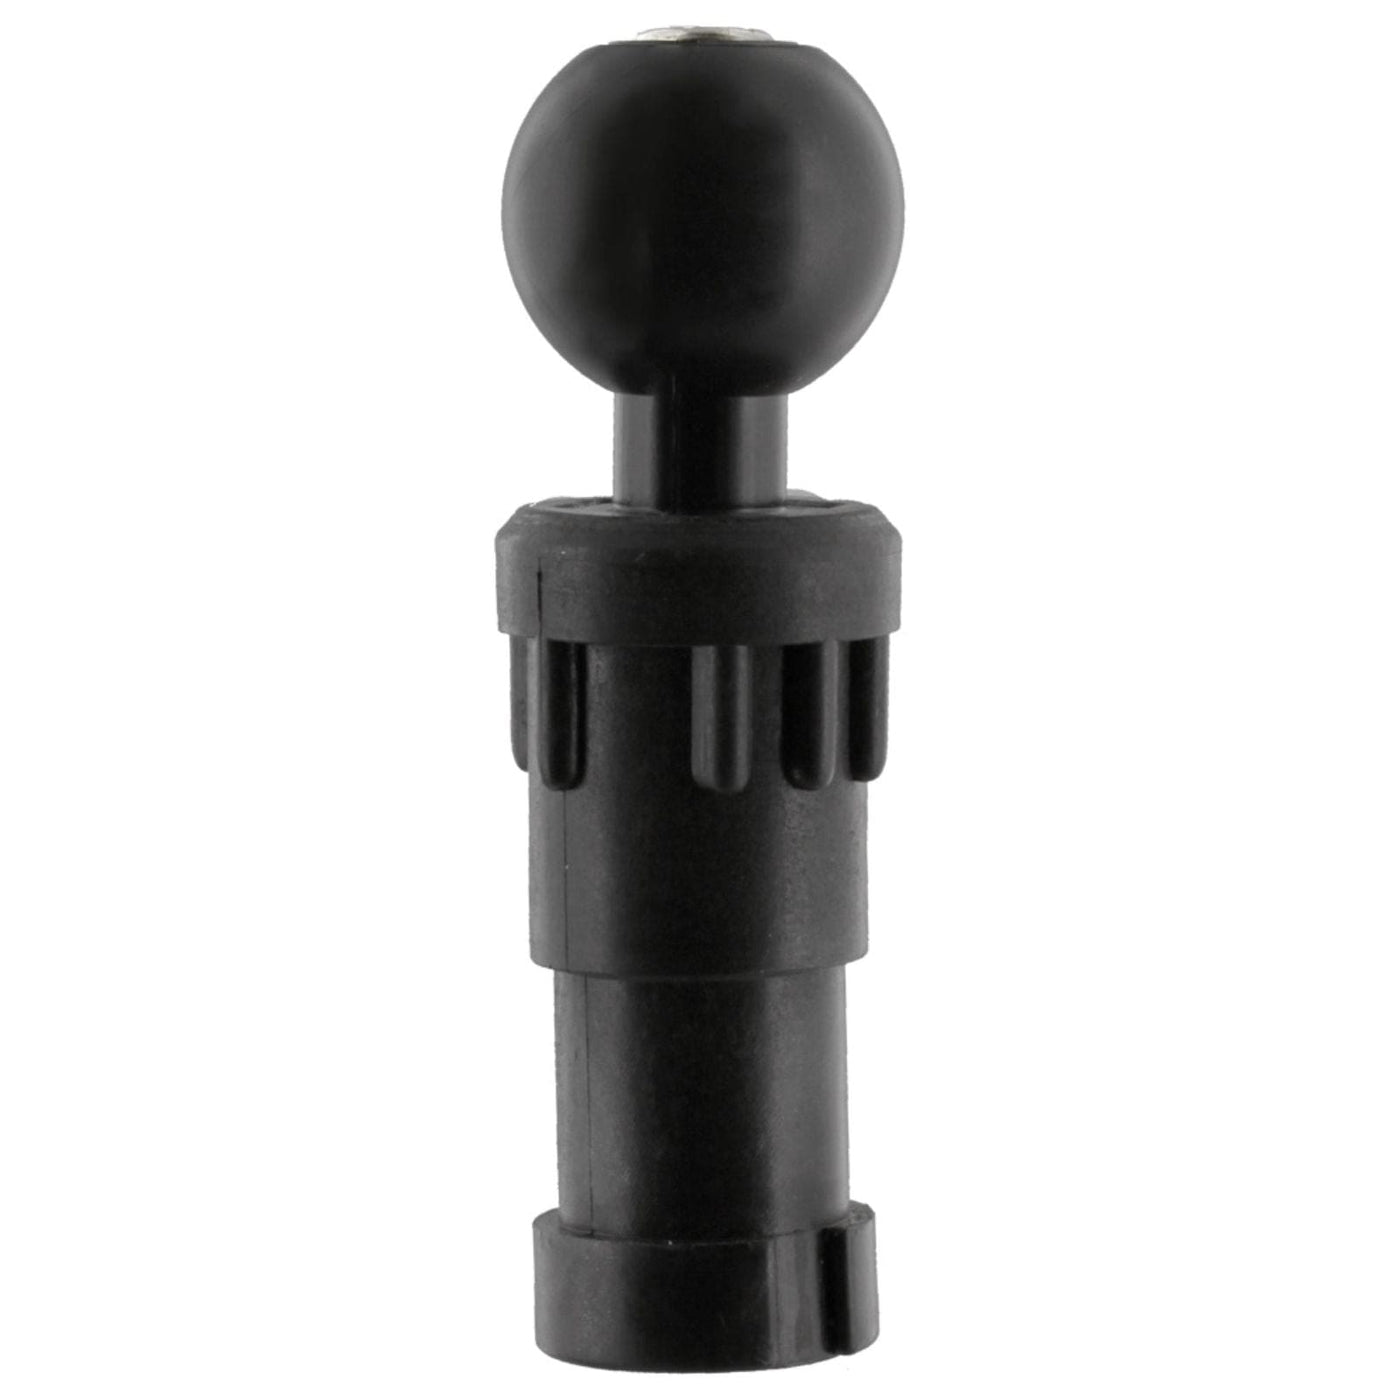 Scotty Scotty 1 Inch Ball with Post Marine And Water Sports